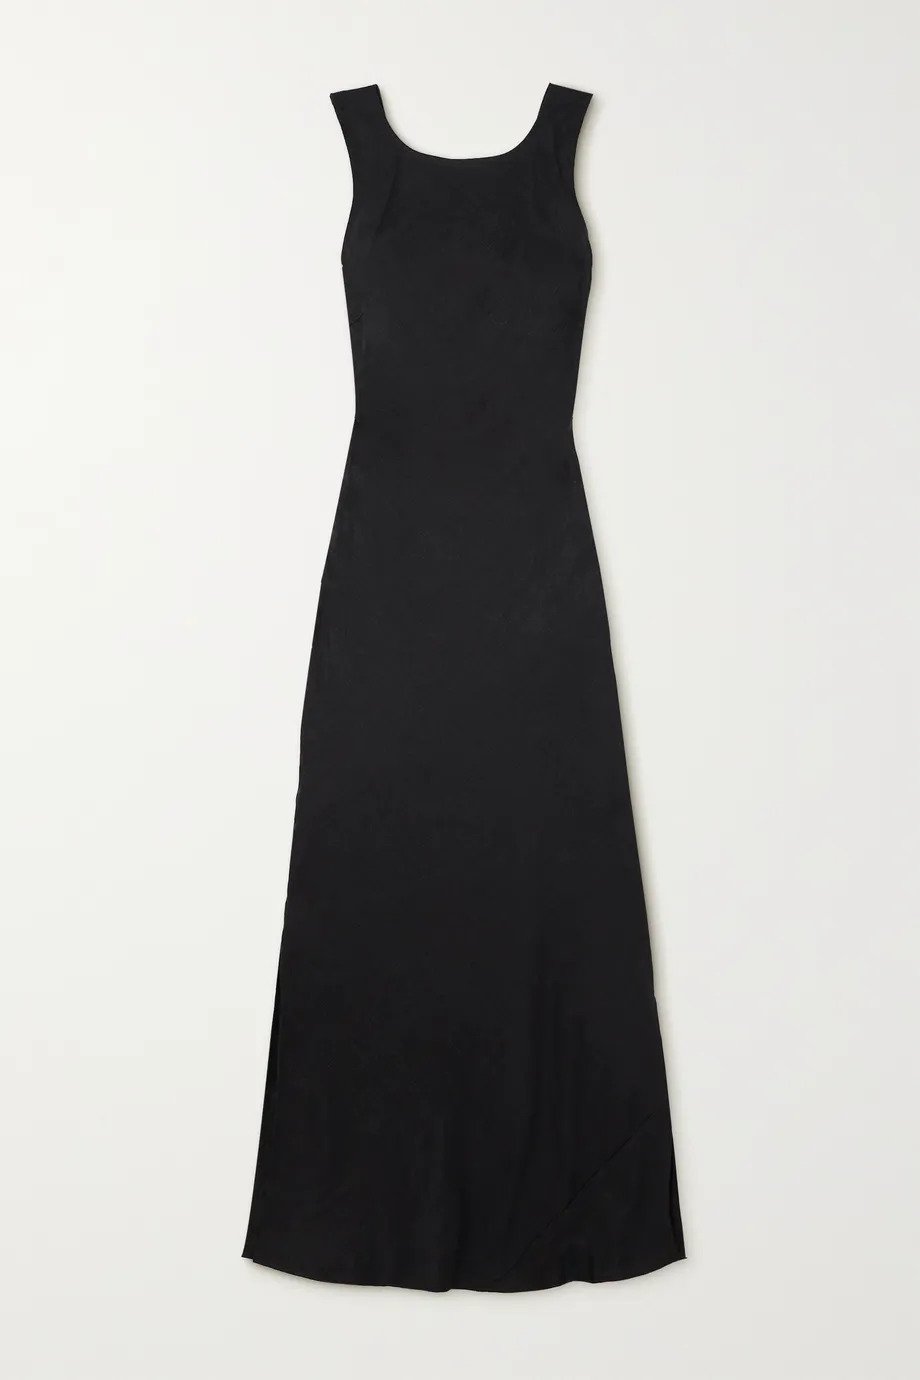 23 of the Best Black Dresses to Shop Now | Who What Wear UK